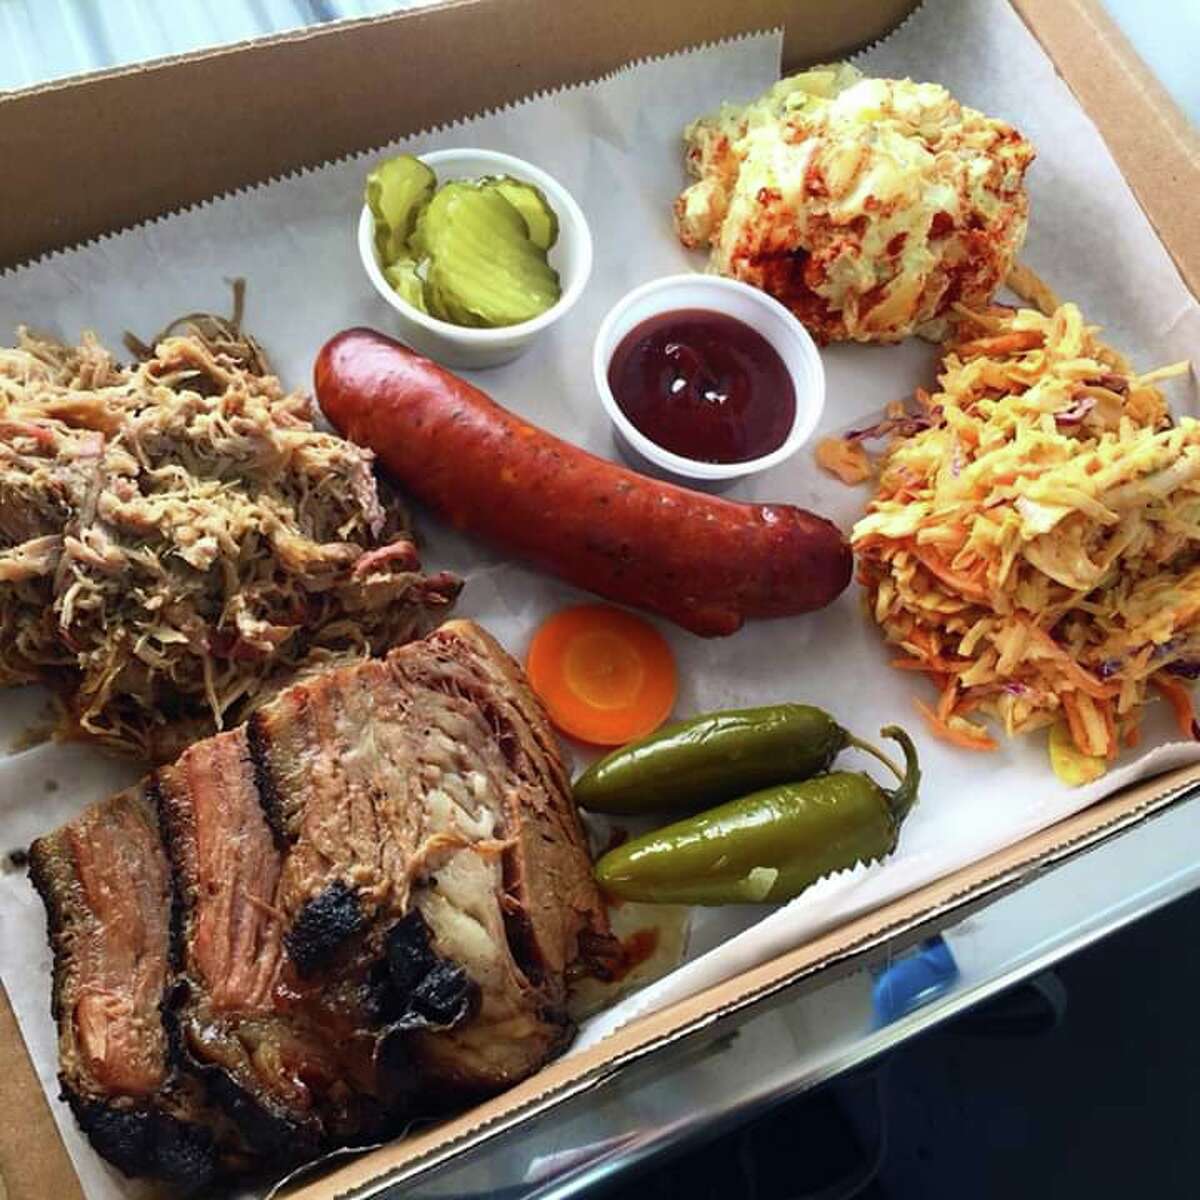 Duncan describes his BBQ as "Central Texas Style, Low & Slow 14 hour Smoked Briskets" and offers sandwiches, tacos, nachos, and baked potatoes, with more items like beef ribs, Smoked turkey and boudin planned for the Katy location's menu.